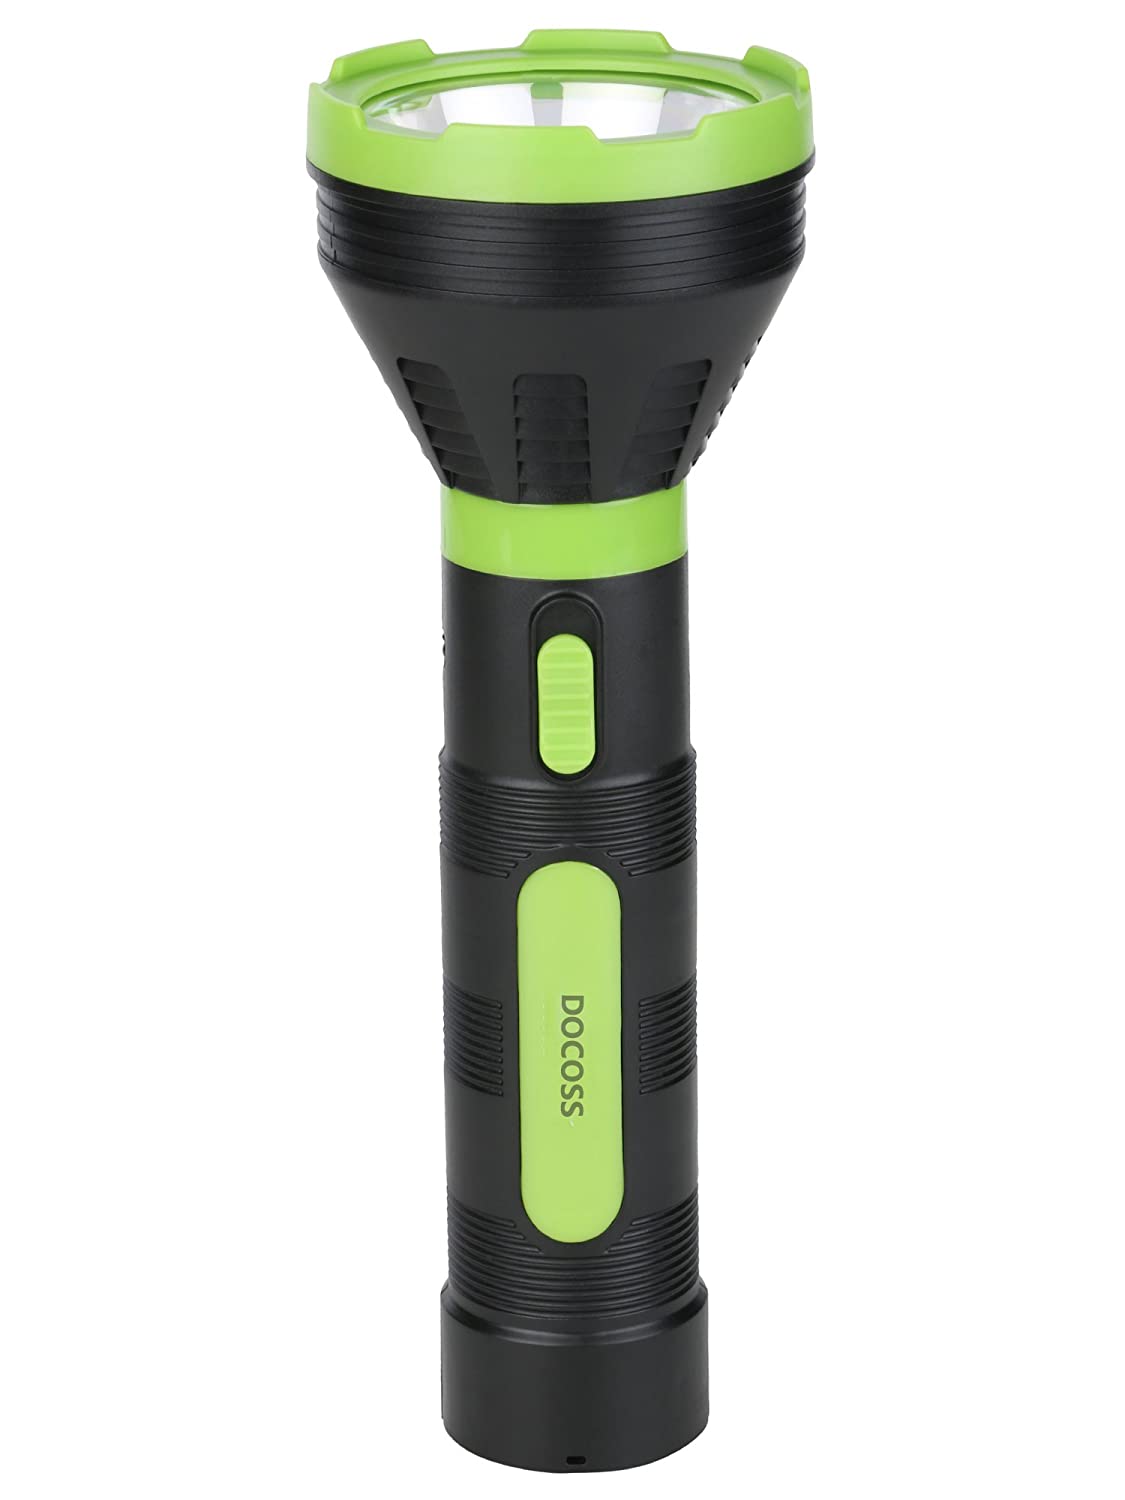 DOCOSS ABS 5W Rechargeable LED Torch Focus Light Laser Long Range Distance High Power (Multi-color)